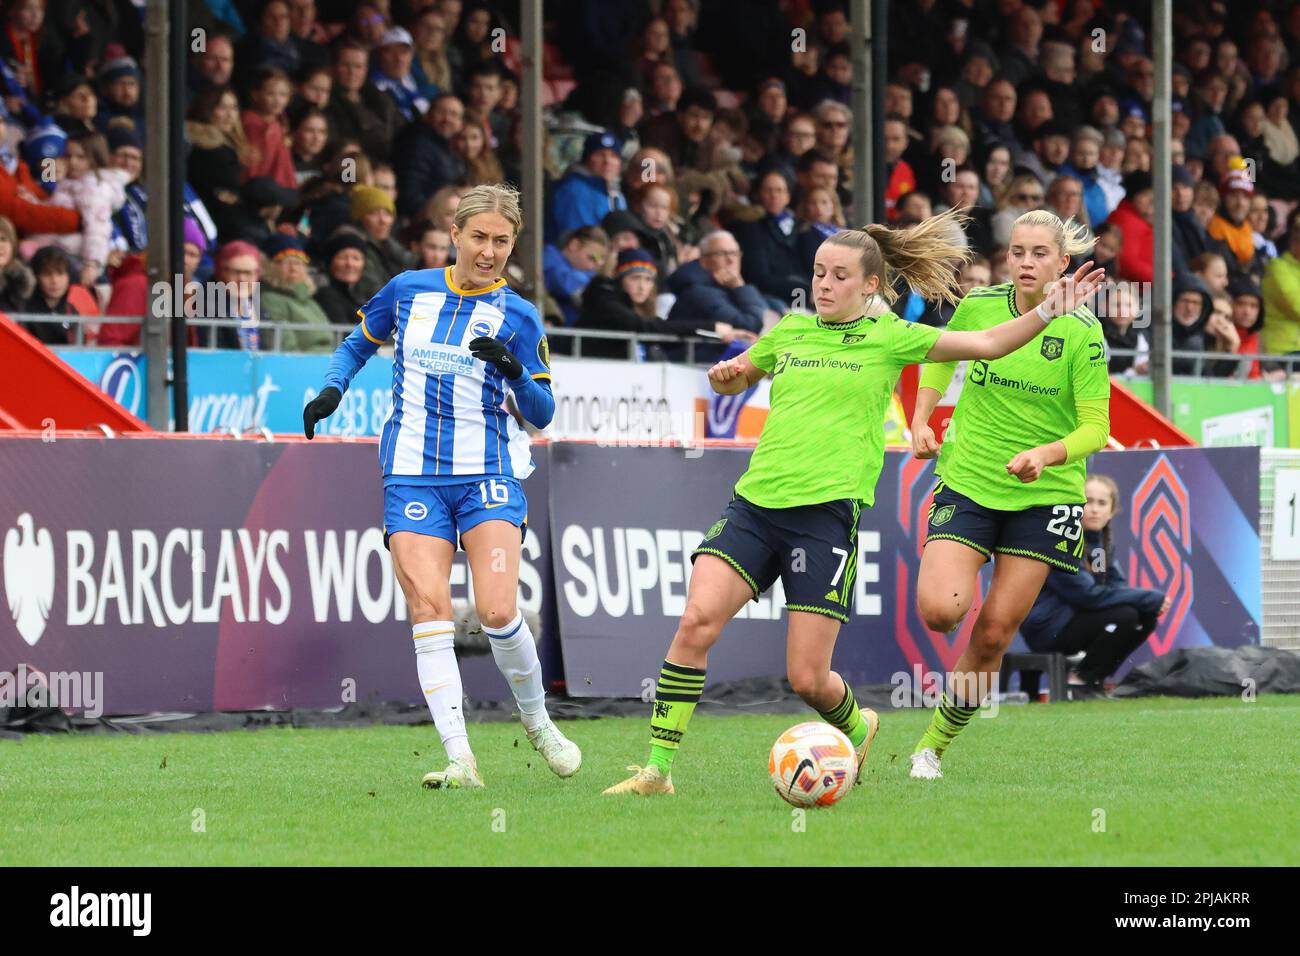 Crawley, UK. 01st Apr, 2023. Broadfield Stadium, Crawley, UK, April 01, 2023 Swedish defender Emma Kullberg (16, Brighton & Hove Albion) taking on two Lionesses Ella Toone (7, Manchester United) and Alessia Russo (23, Manchester United) during a WSL game on 01 April, 2023, between Brighton & Hove Albion and Manchester United at the Broadfield Stadium, Crawley, UK (Bettina Weissensteiner/SPP) Credit: SPP Sport Press Photo. /Alamy Live News Stock Photo